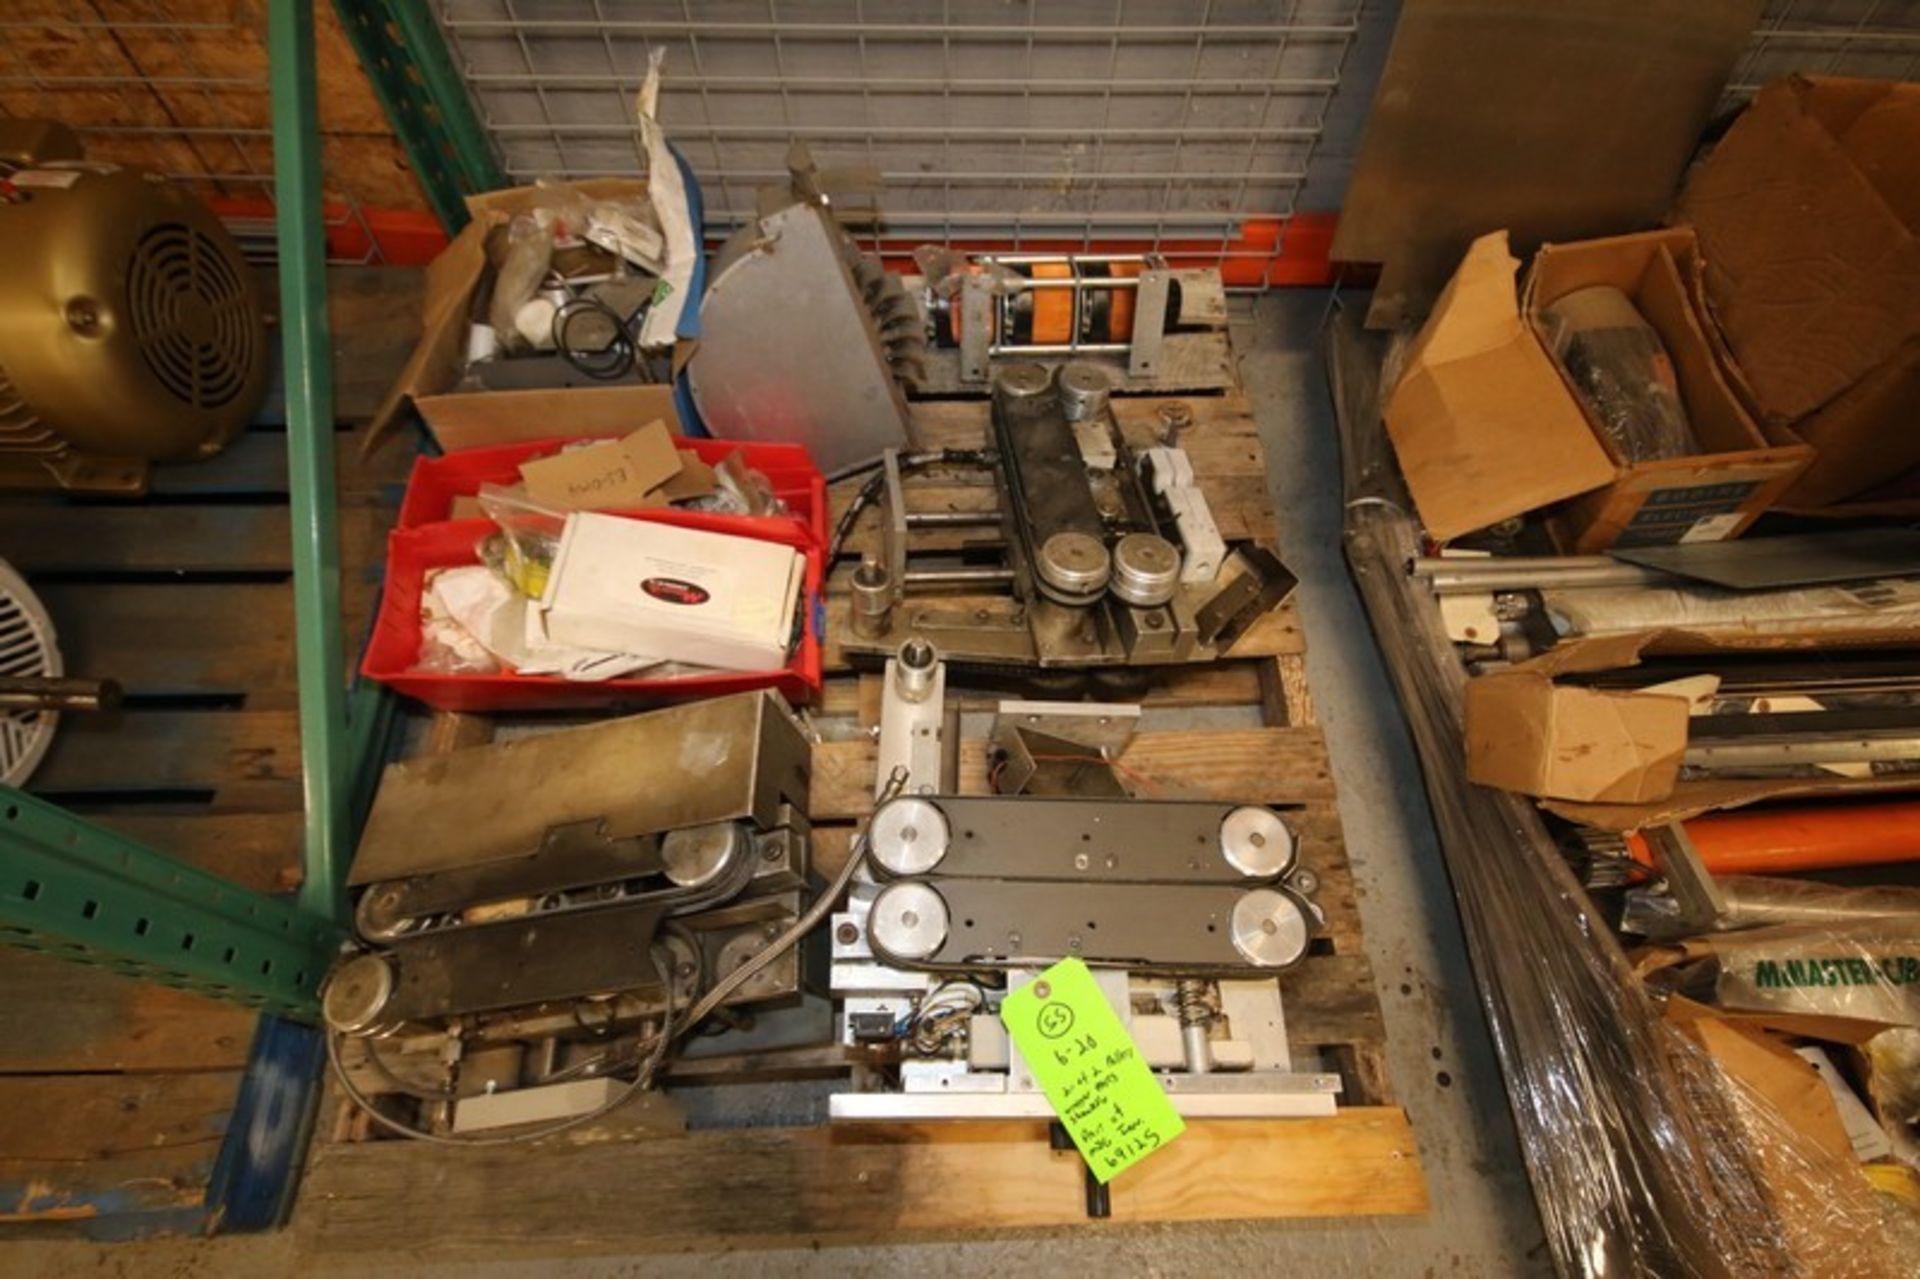 Lot of (2) Pallets of Assorted Shanklin Wrapper Parts & Etc., Including Drive Motor, Blower, Shafts, - Image 3 of 3